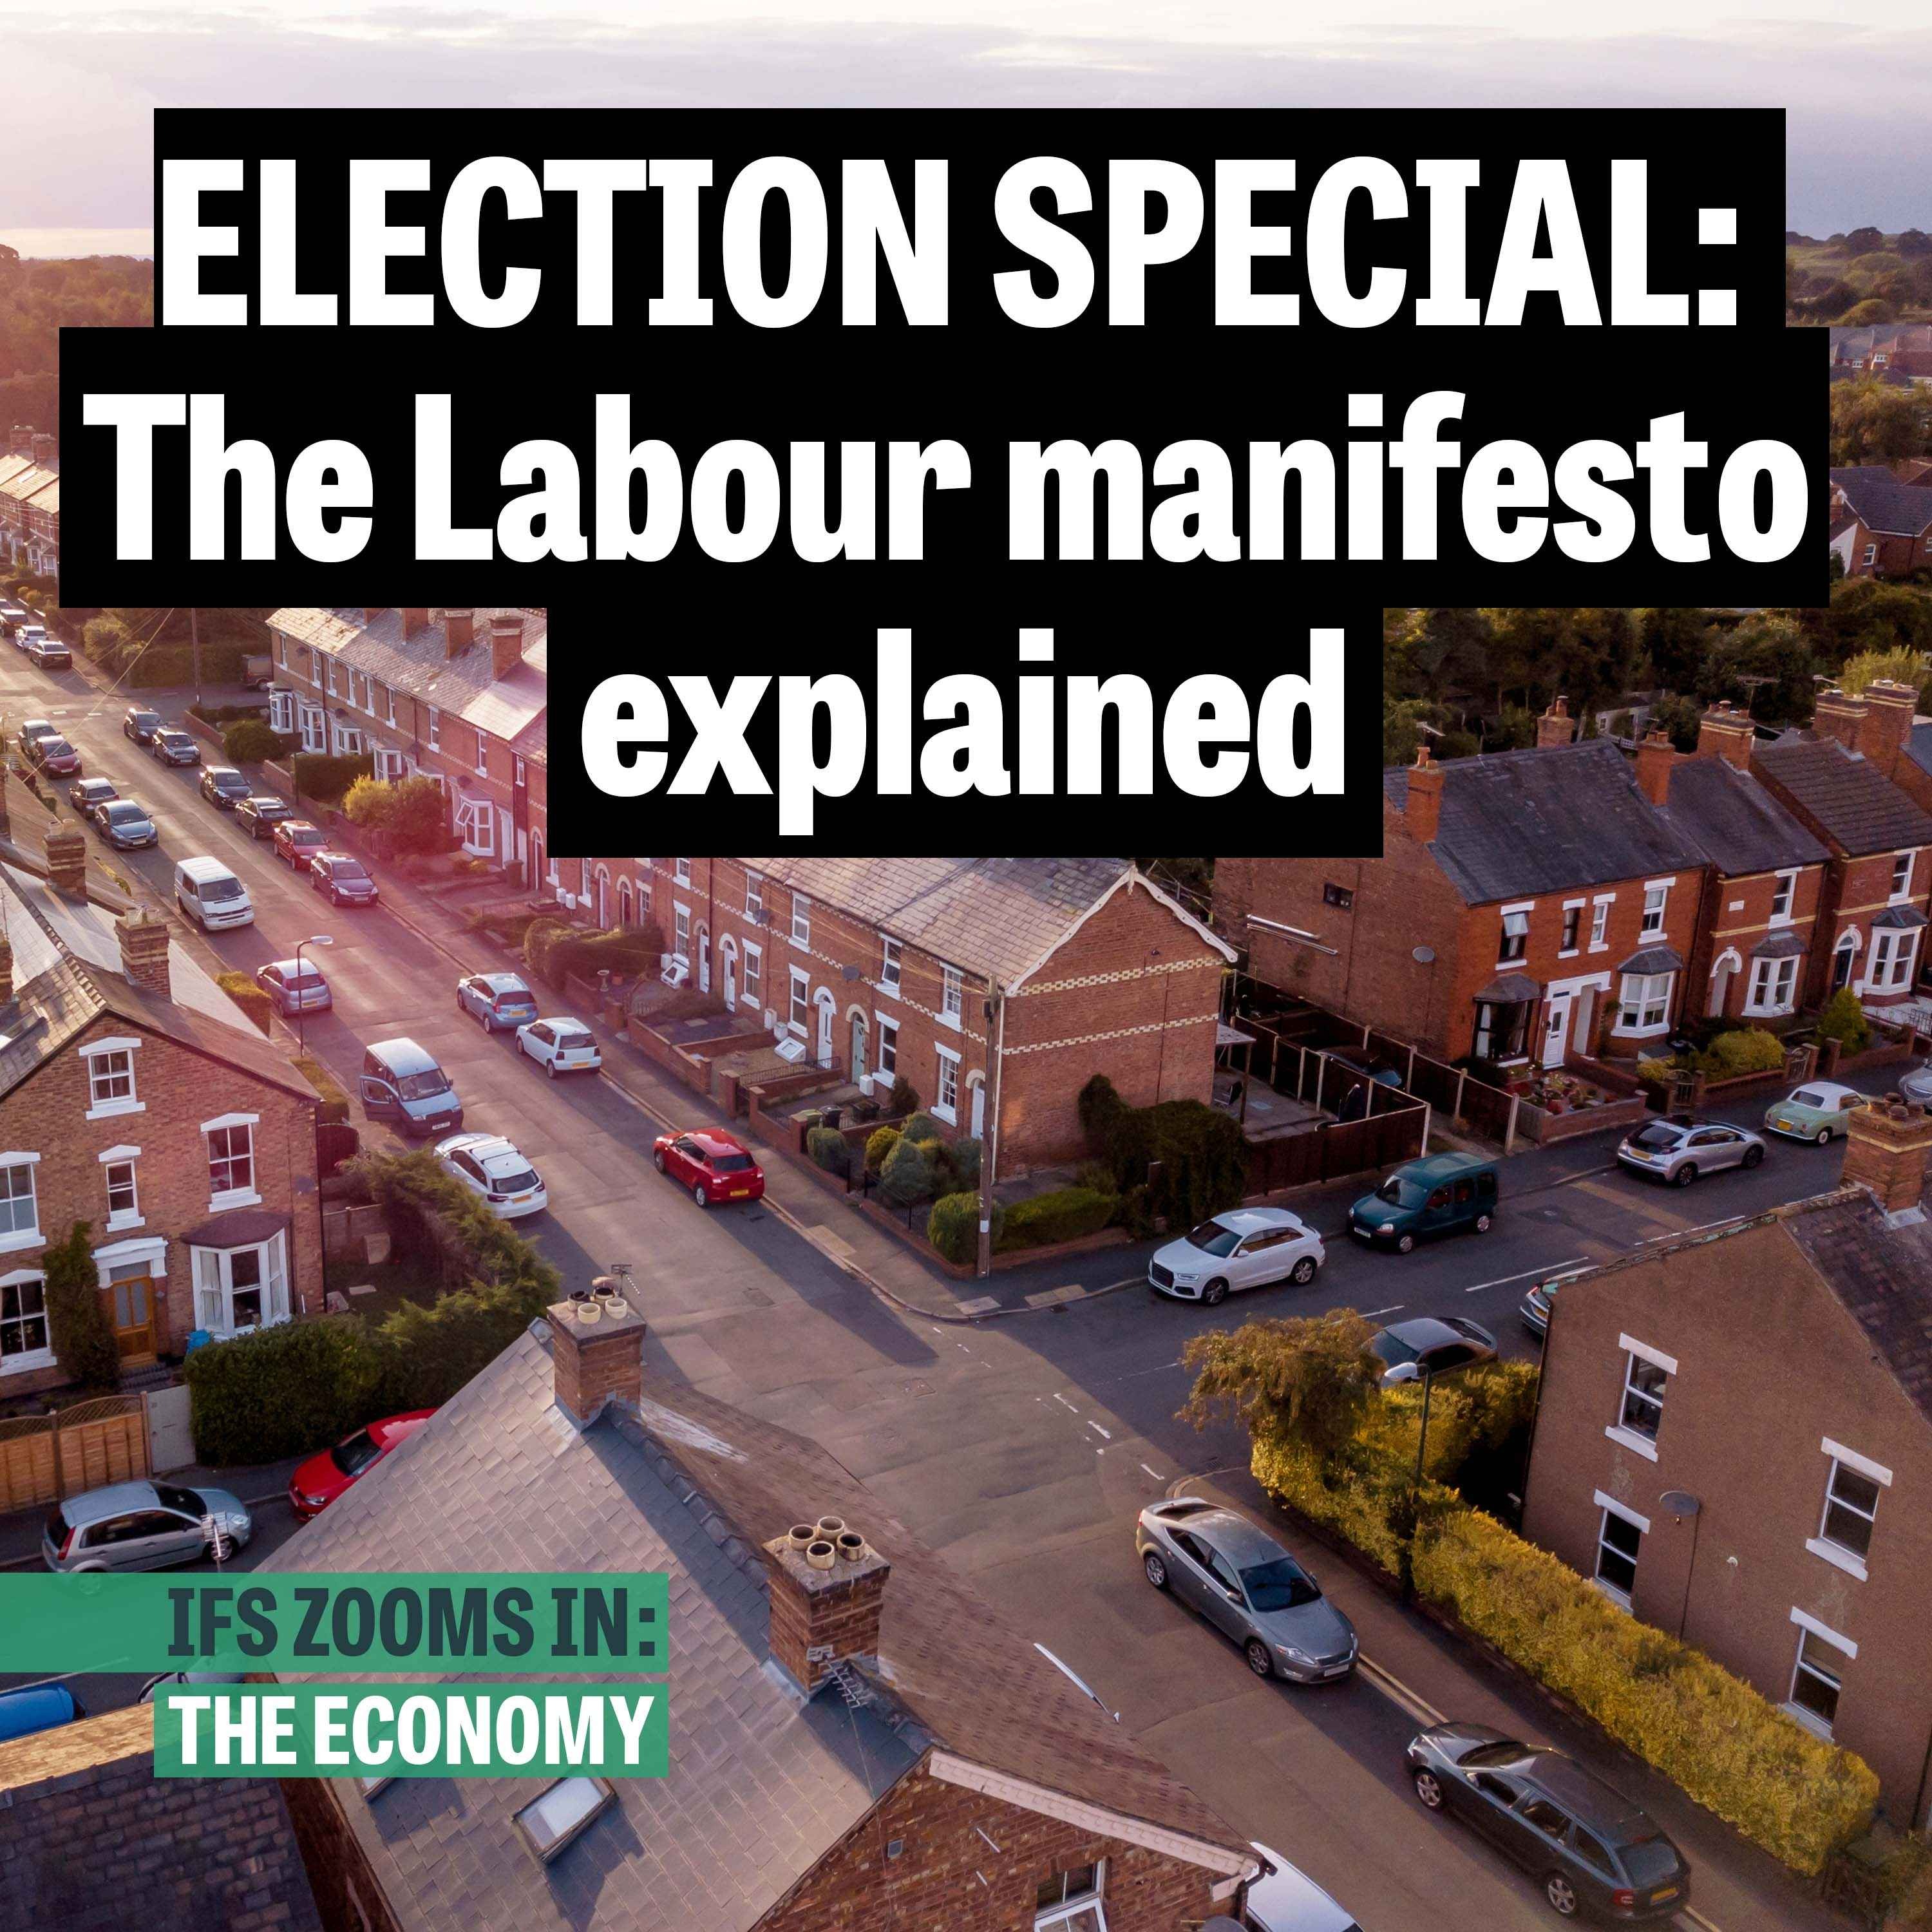 ELECTION SPECIAL: The Labour manifesto explained